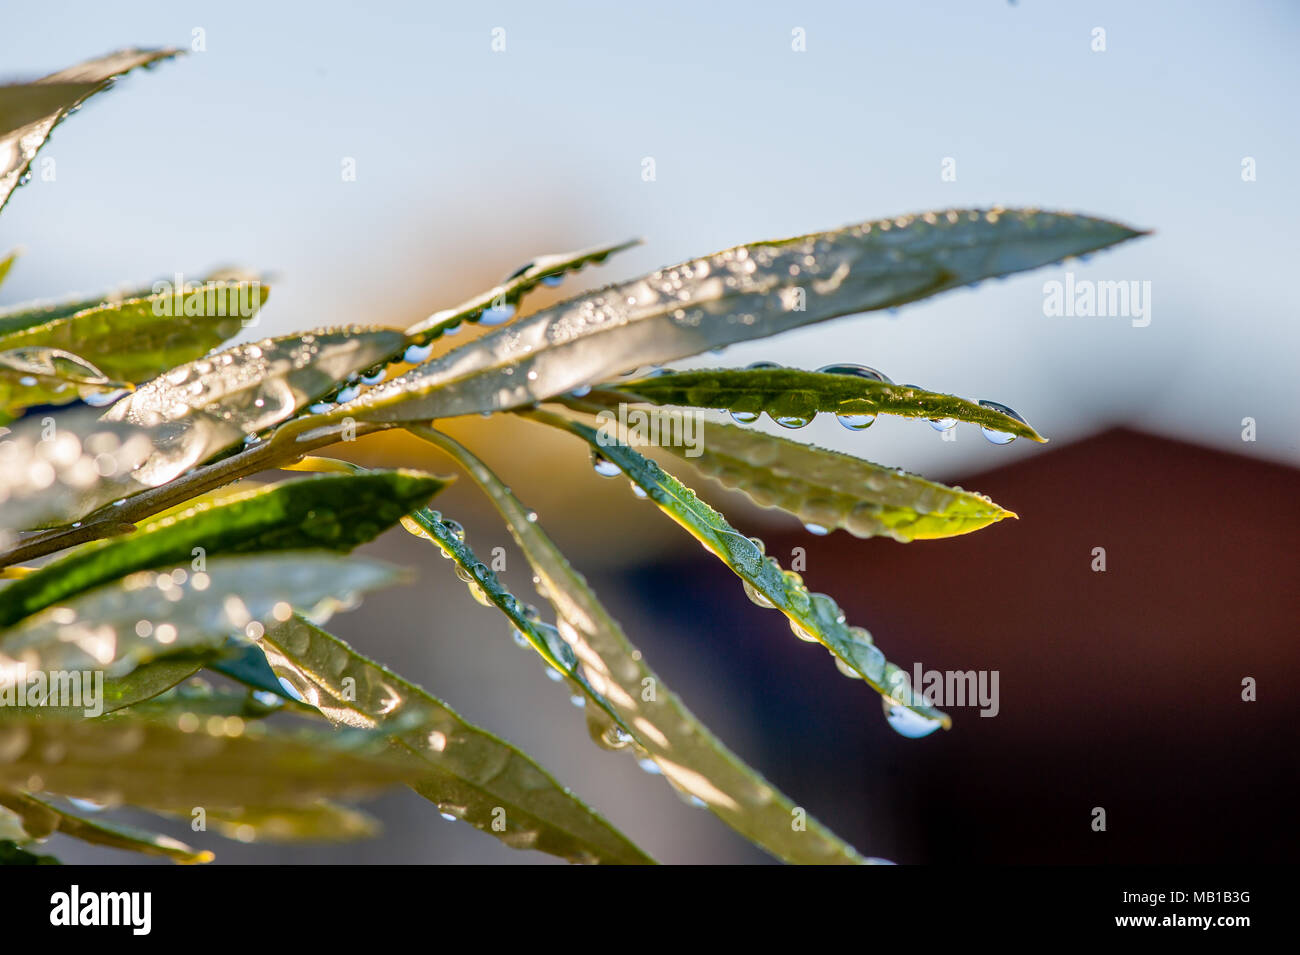 Olive tree leaves covered in wet morning dew water droplets, in bright sunshine Stock Photo